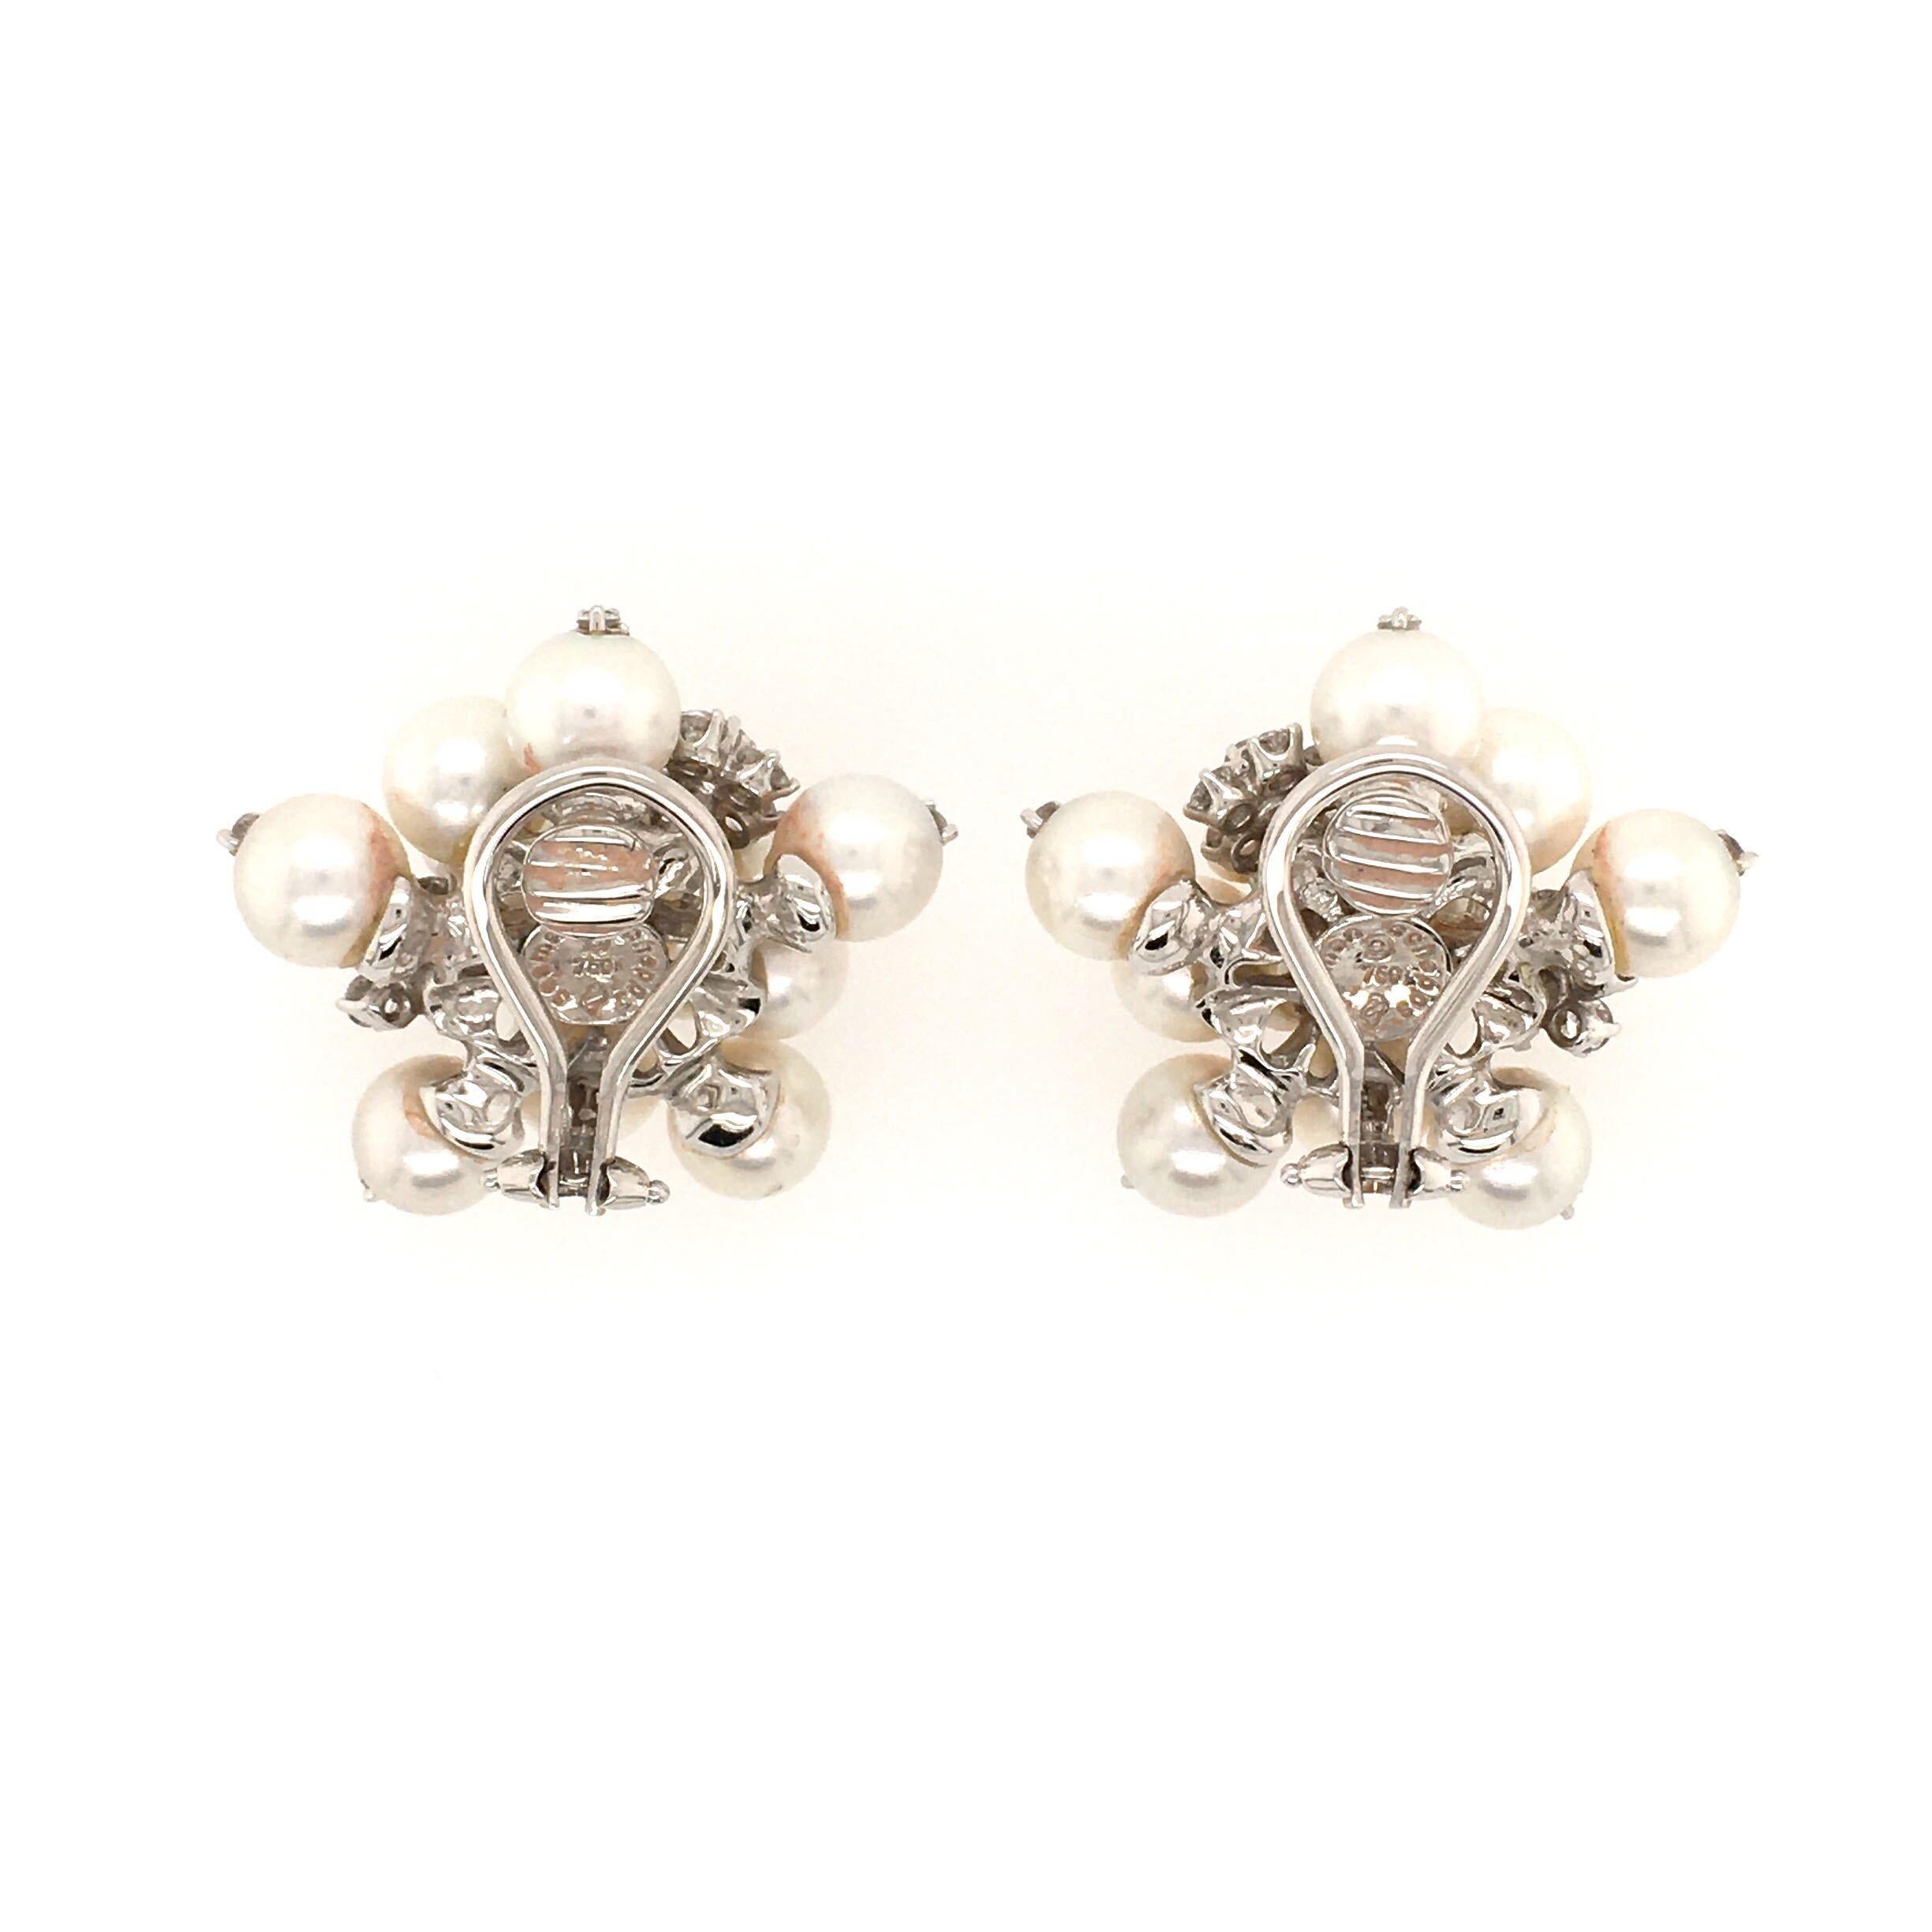 Round Cut Seaman Schepps White Gold, Pearl and Diamond Earrings